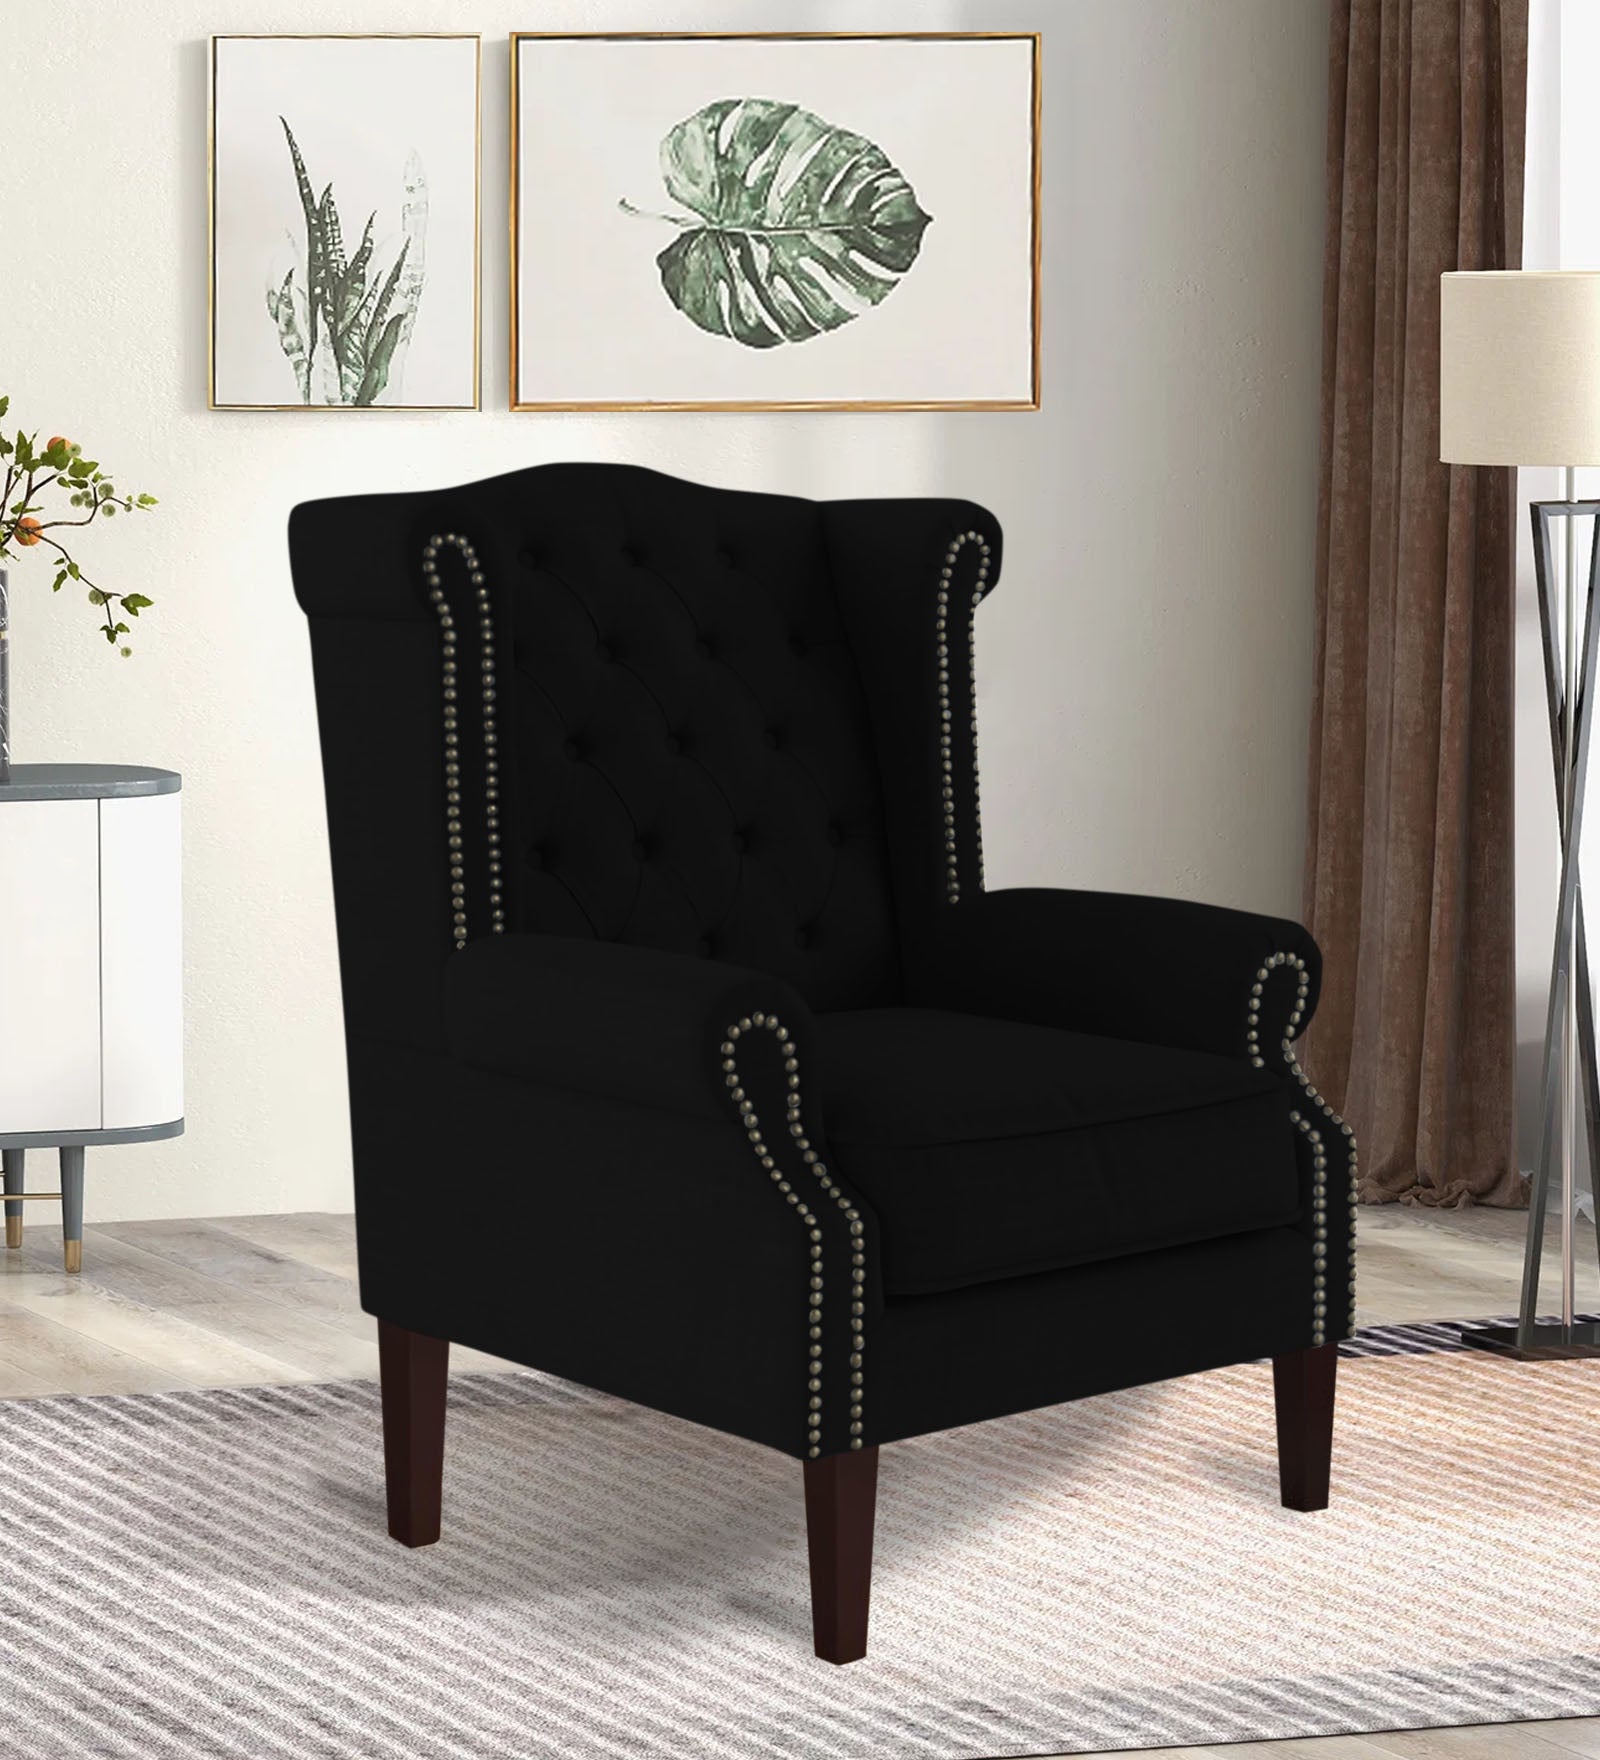 Nottage Fabric Wing Chair in Zed Black Colour